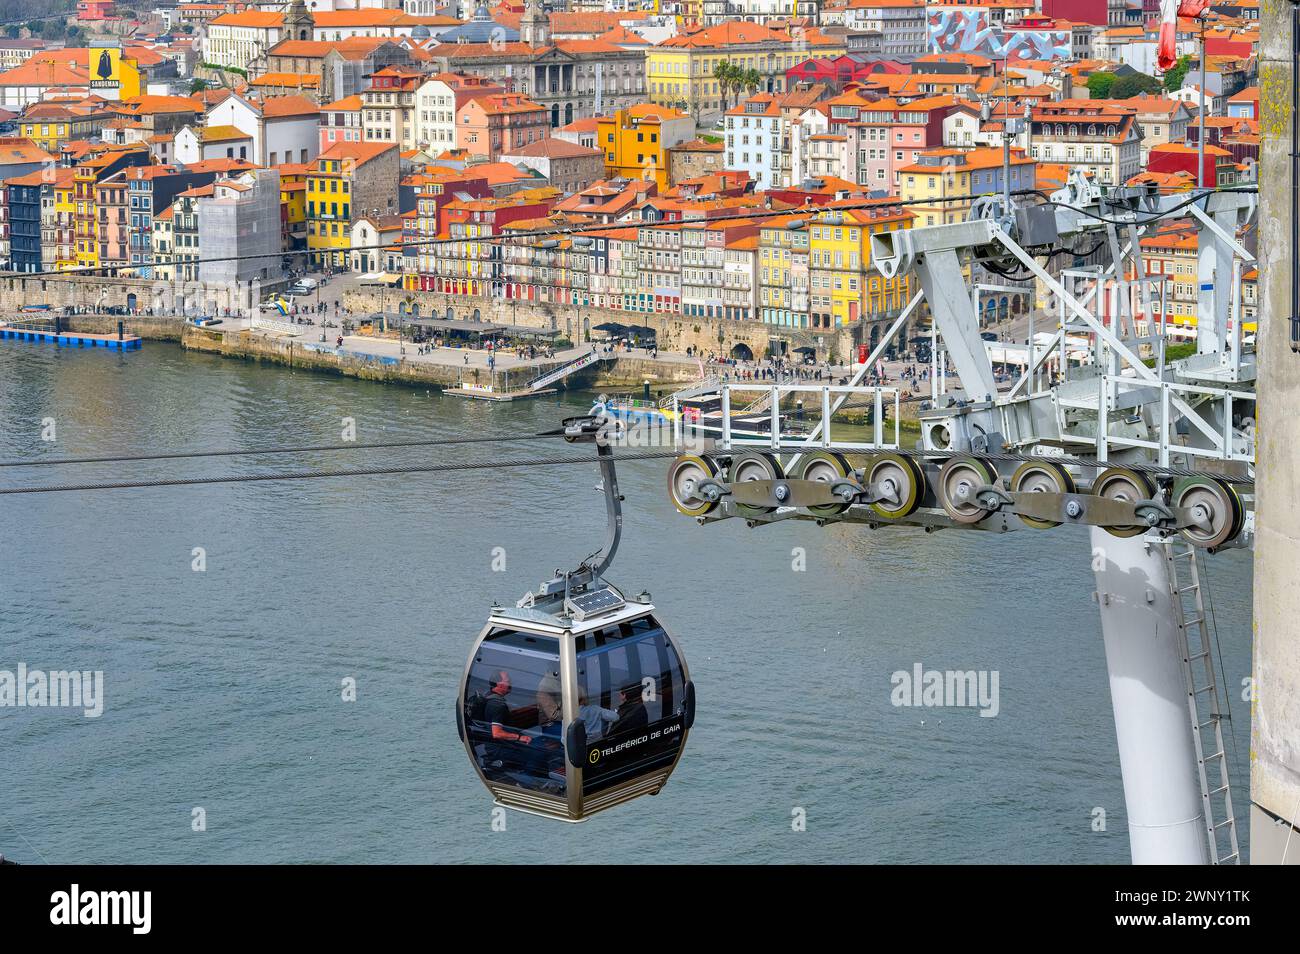 Funicular or cable car in the waterfront district, PORTO, PORTUGAL Stock Photo